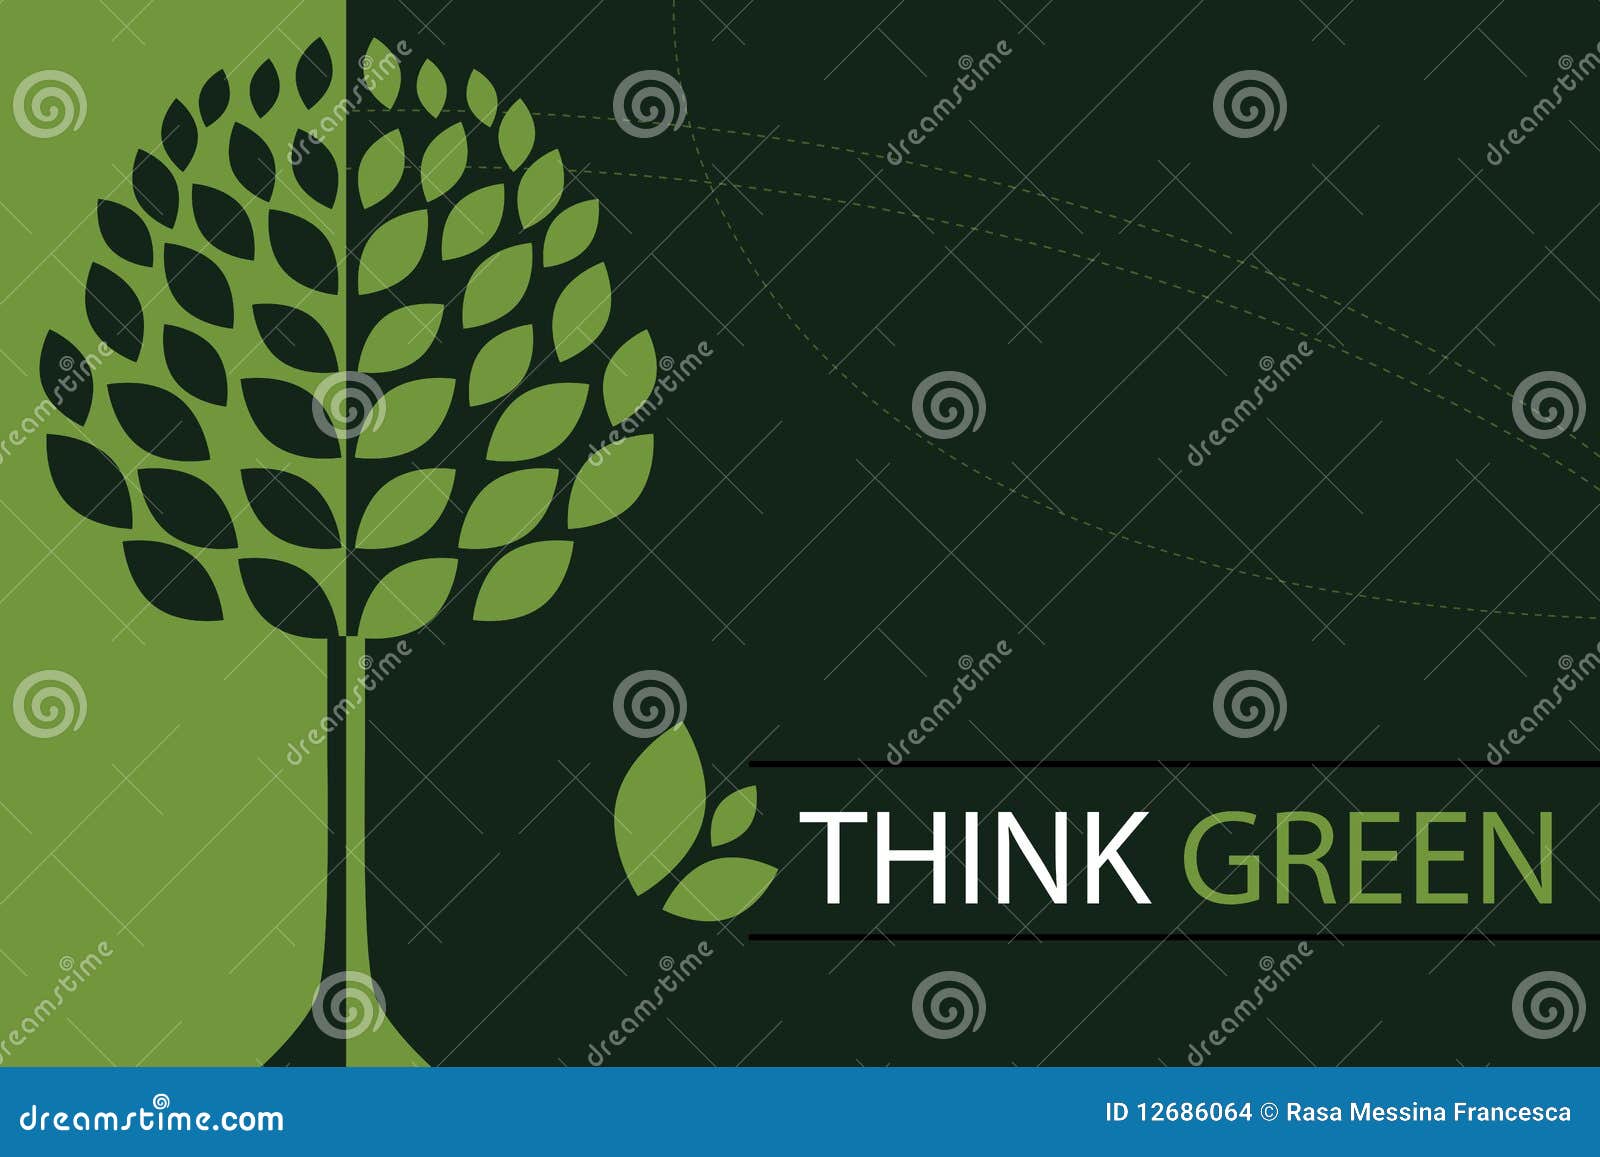 think green concept background - 